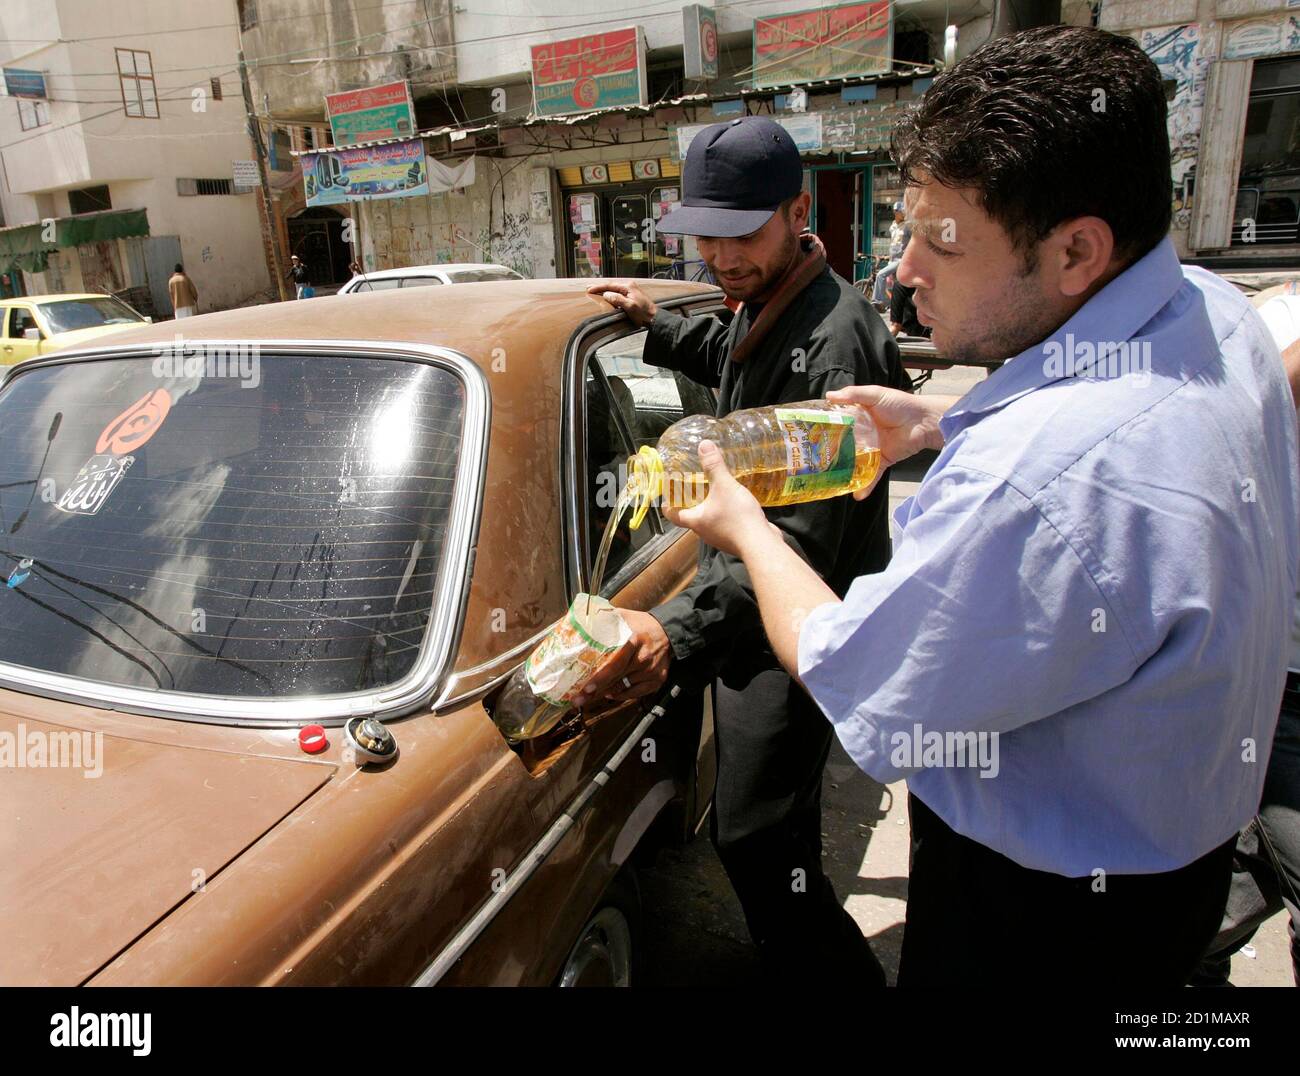 A Palestinian taxi driver fills his taxi with cooking oil in Gaza Strip April 30, 2008. Faced with chronic fuel shortages due to an Israeli blockade and a strike by Palestinian distributors protesting supply caps, taxi drivers in the Gaza Strip are filling their tanks with cooking oil, often scrounging leftover fat from street vendors. To match feature PALESTINIANS-ISRAEL/FUEL REUTERS/Ibraheem Abu Mustafa (GAZA) Stock Photo